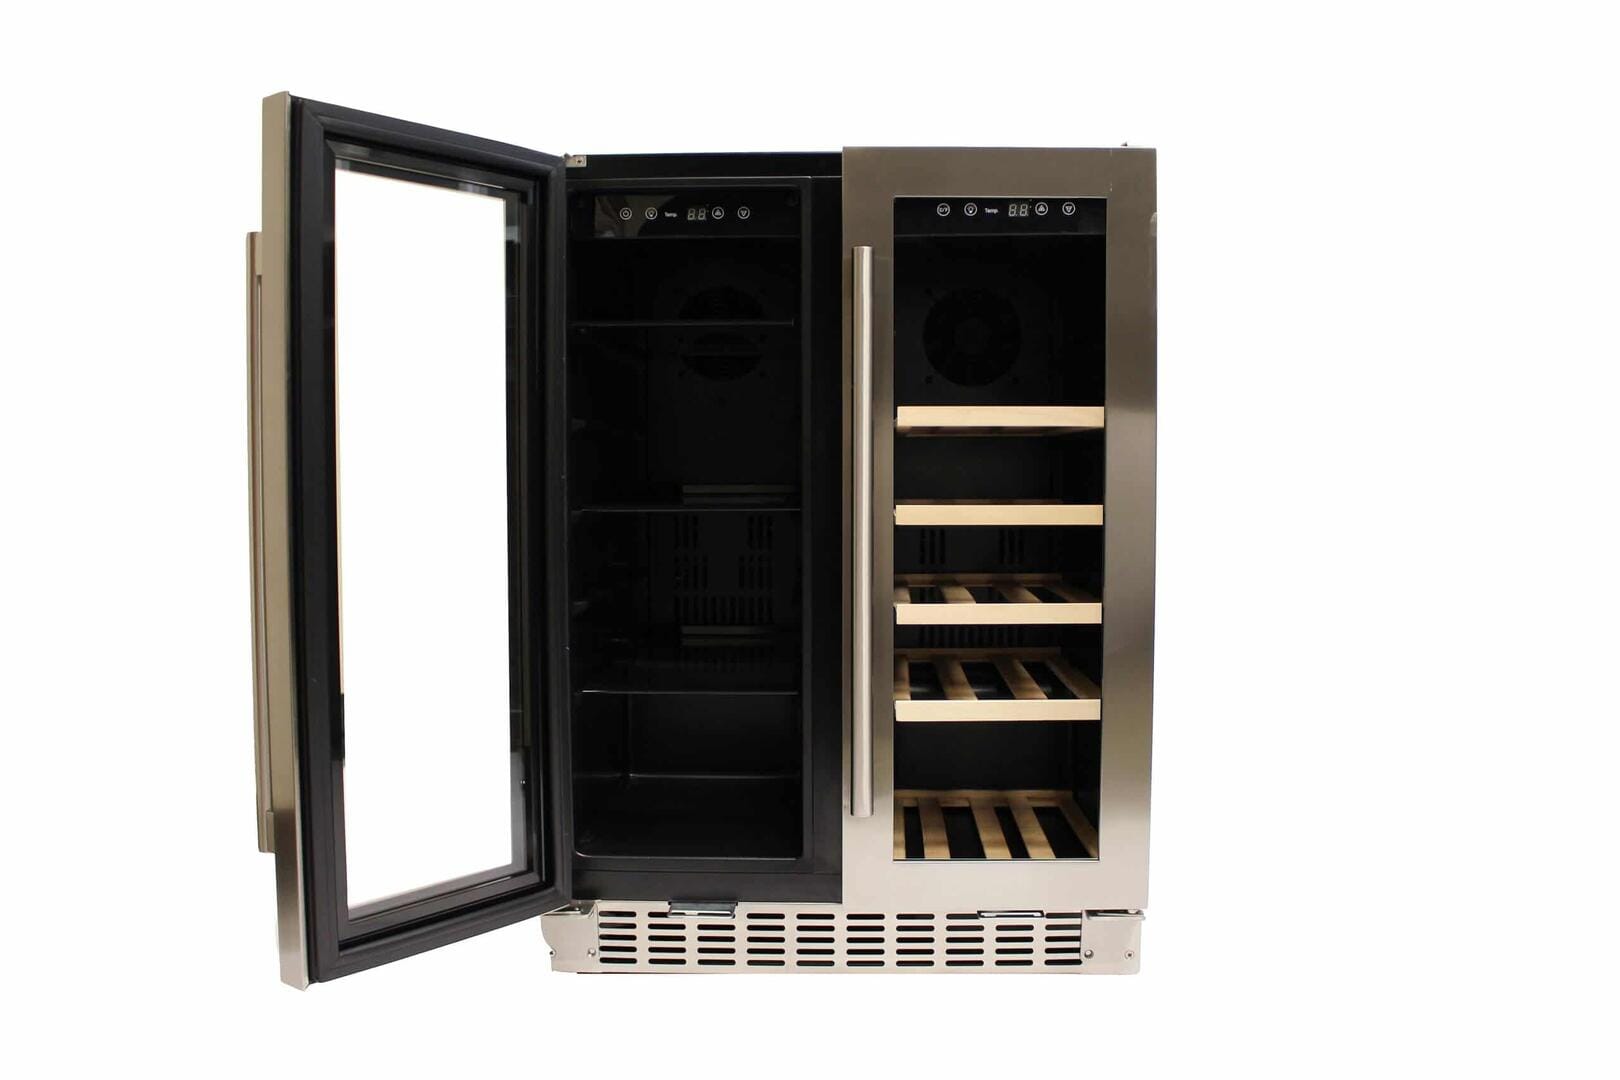 Alfresco Beverage Centers Built in and Free Standing Azure - Dual Zone Wine/Beverage Center - Stainless Steel - A124DZ-S